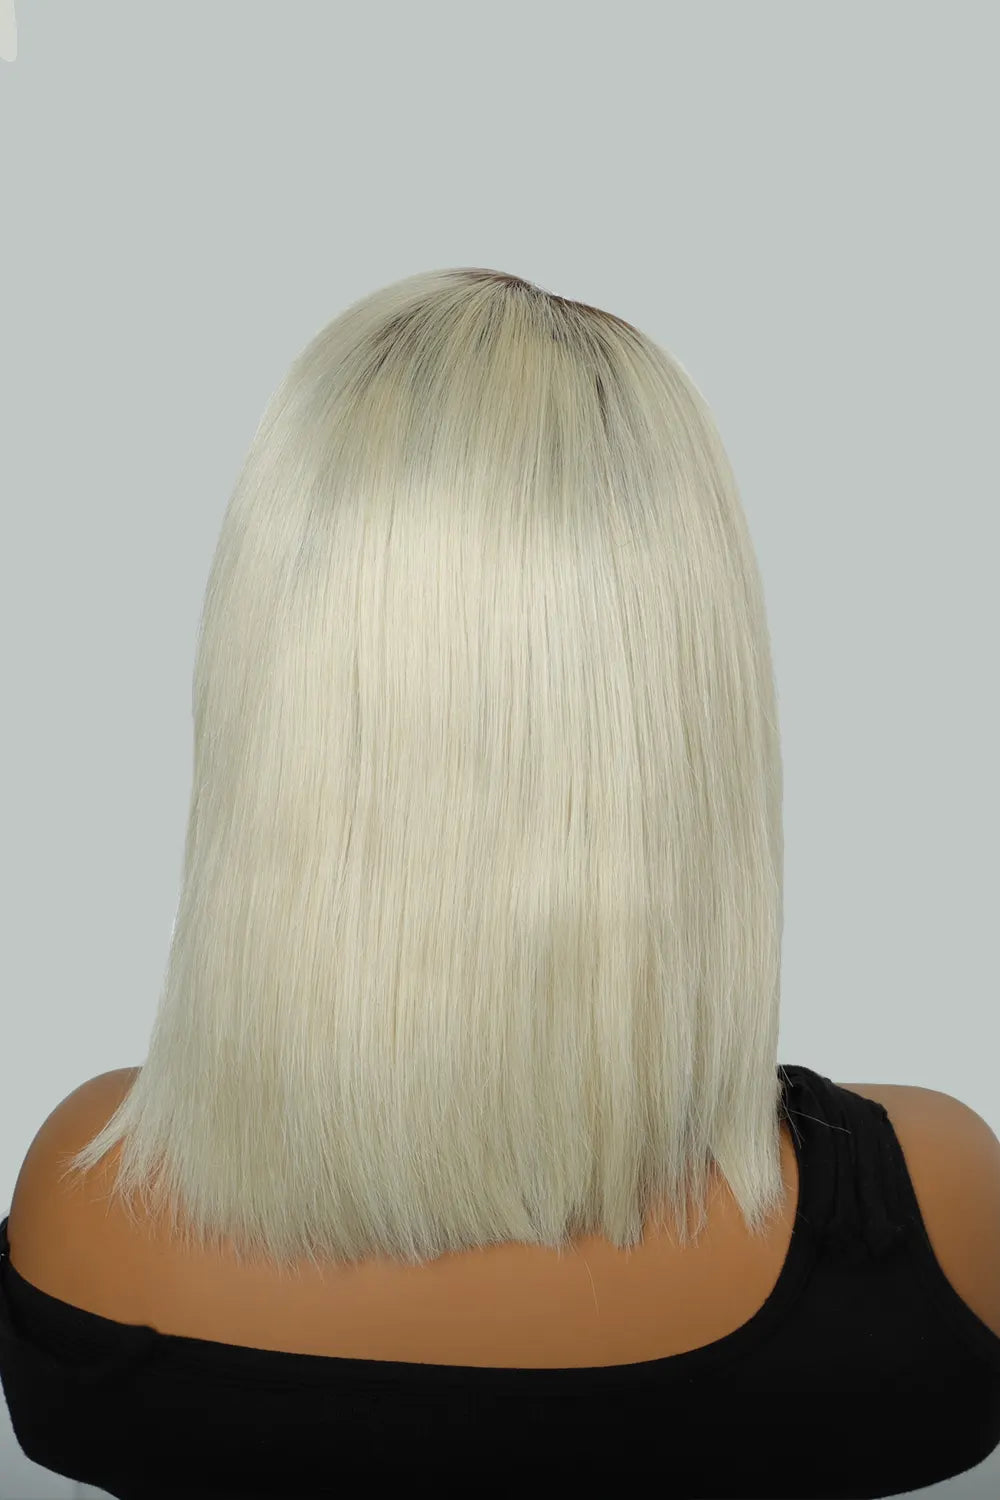 Rear view of model with short blonde hair